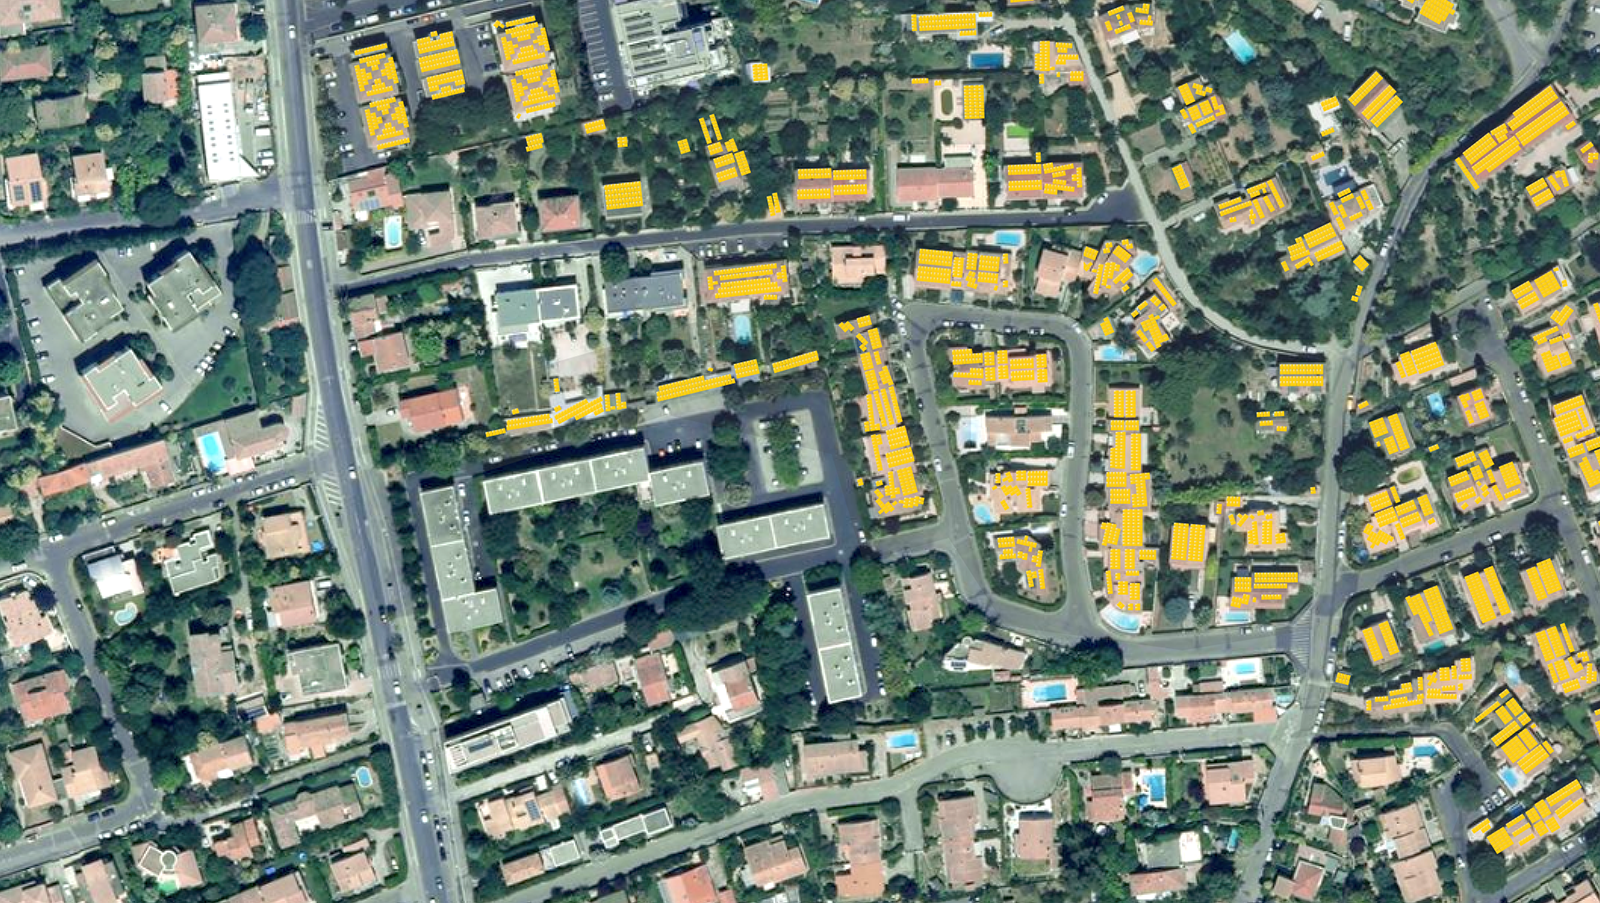 Predicting the Solar Potential of Rooftops using Image Segmentation and Structured Data